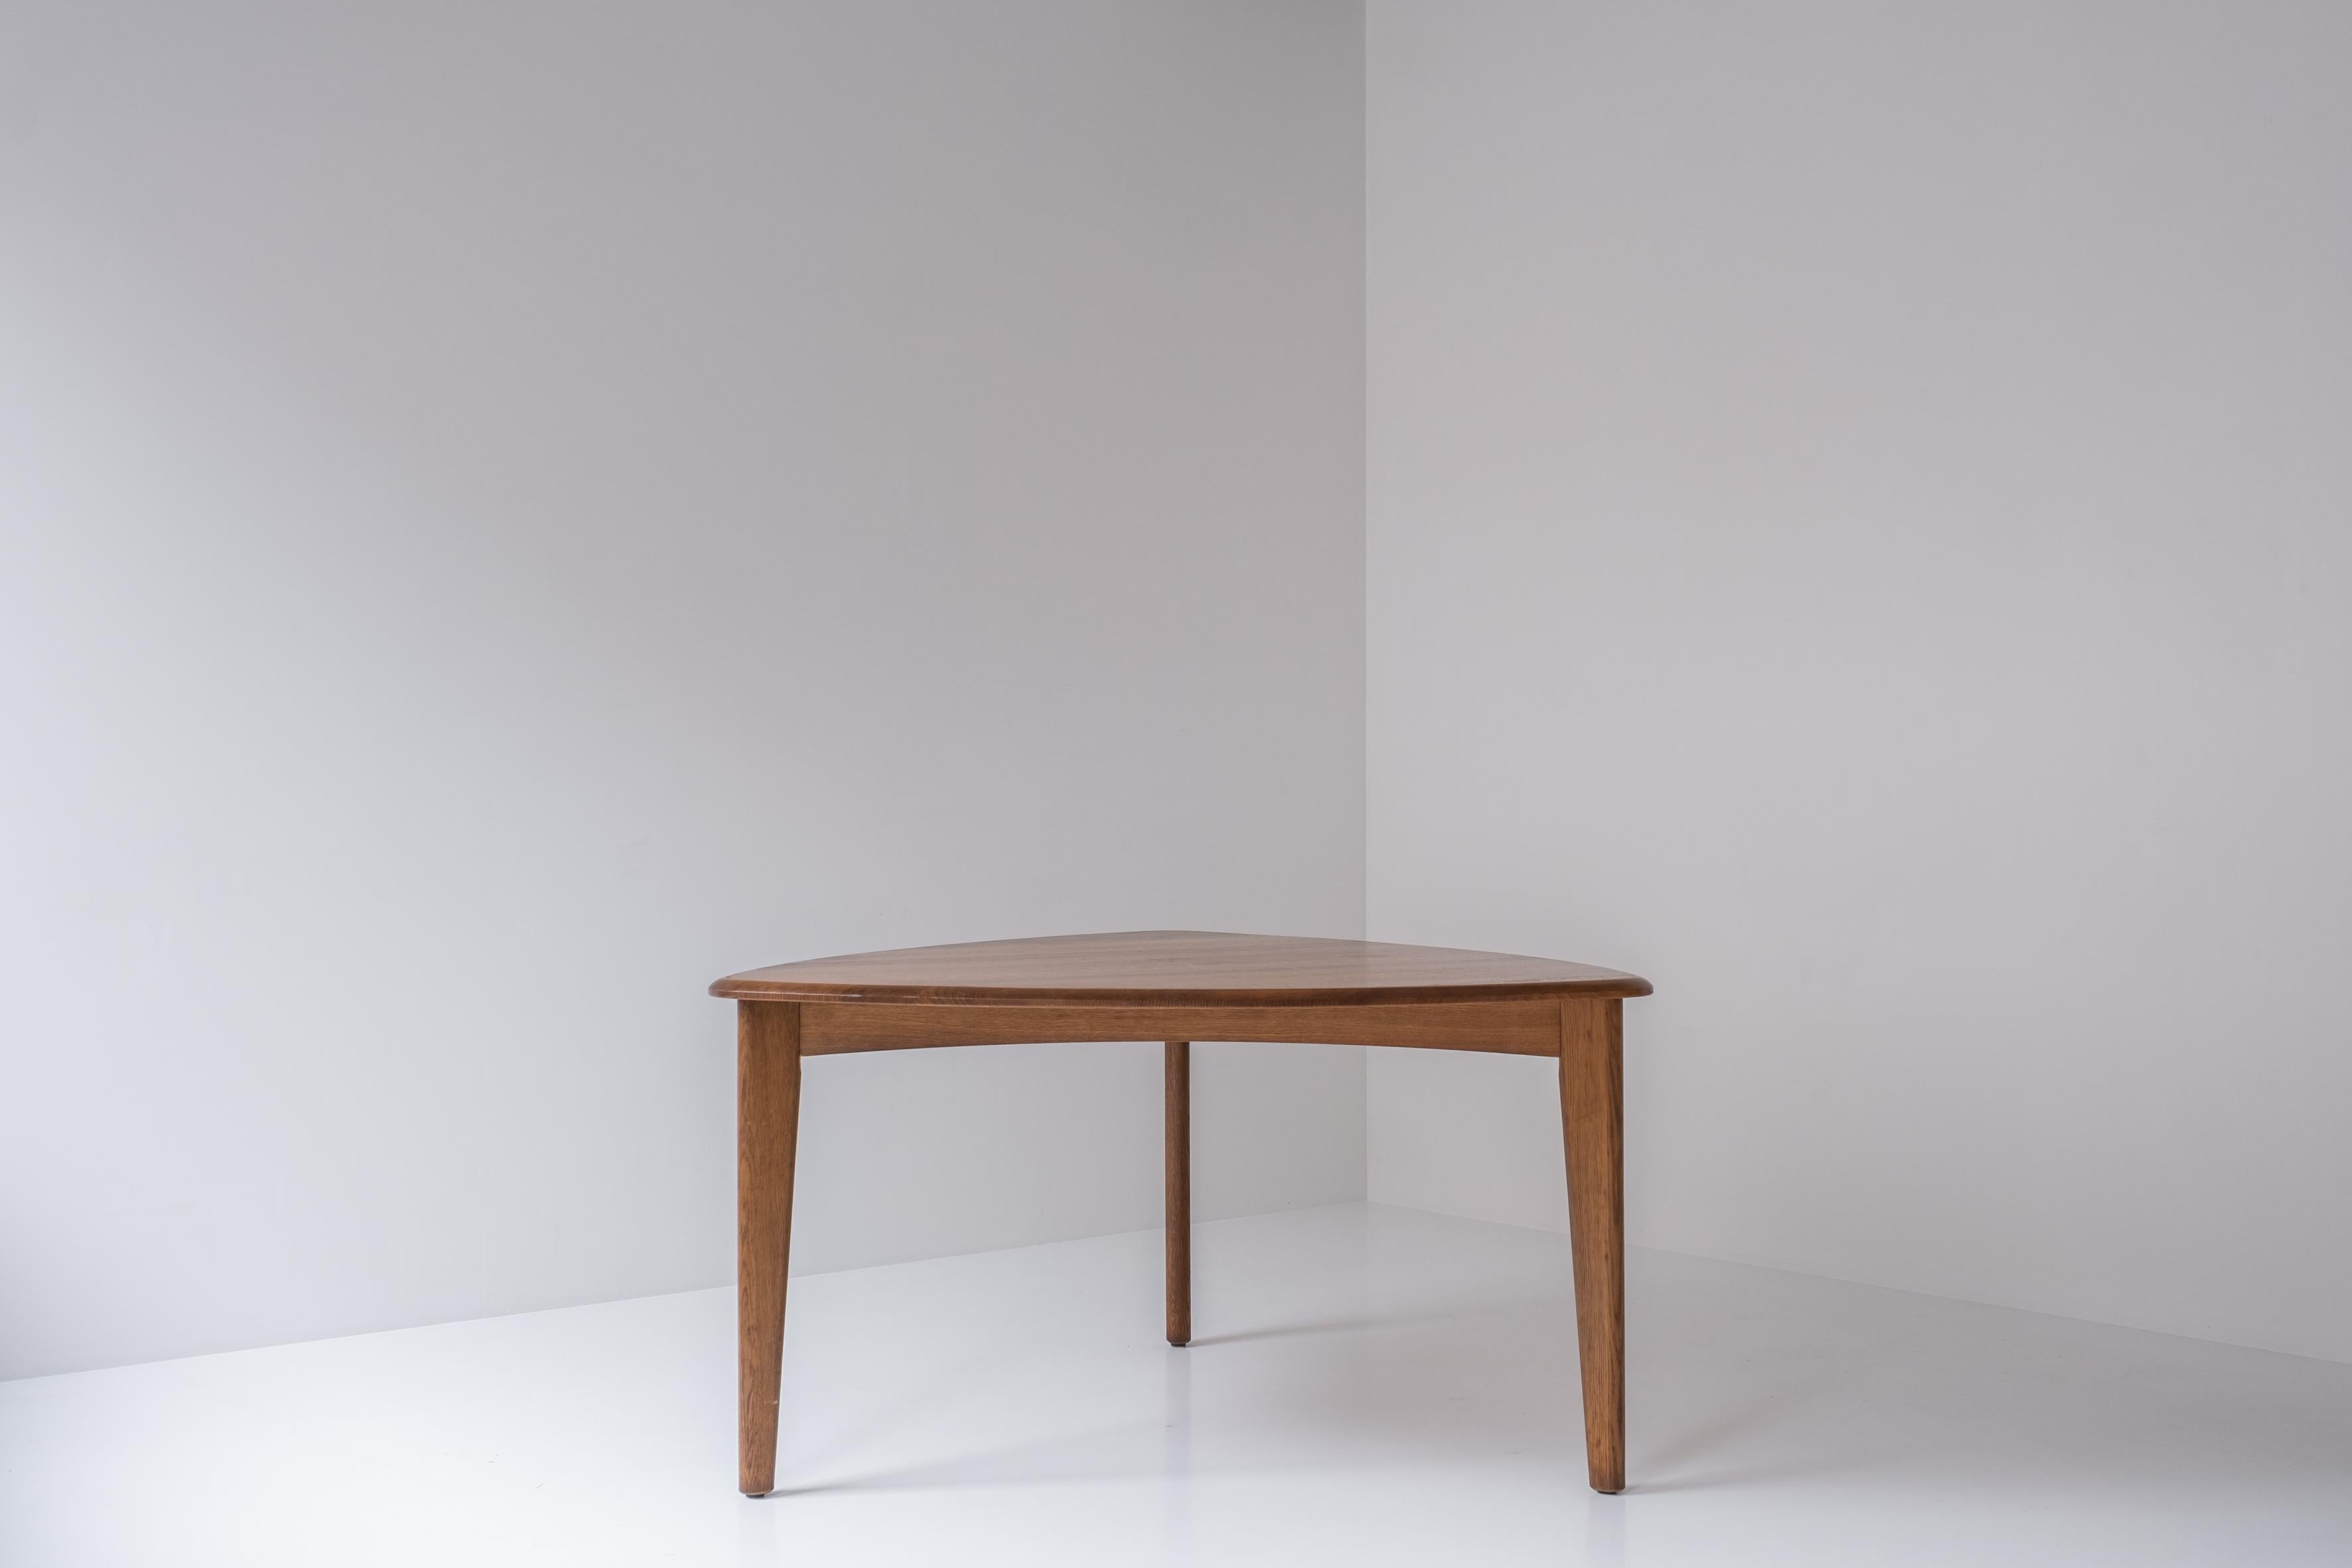 Lovely dining table from France, designed in the 1950s. This solid oak dining table has a triangle shaped top which gives its design a very modern touch. Suits up for 6 persons easily (2 chairs each side). Definitely inspired by the works Pierre